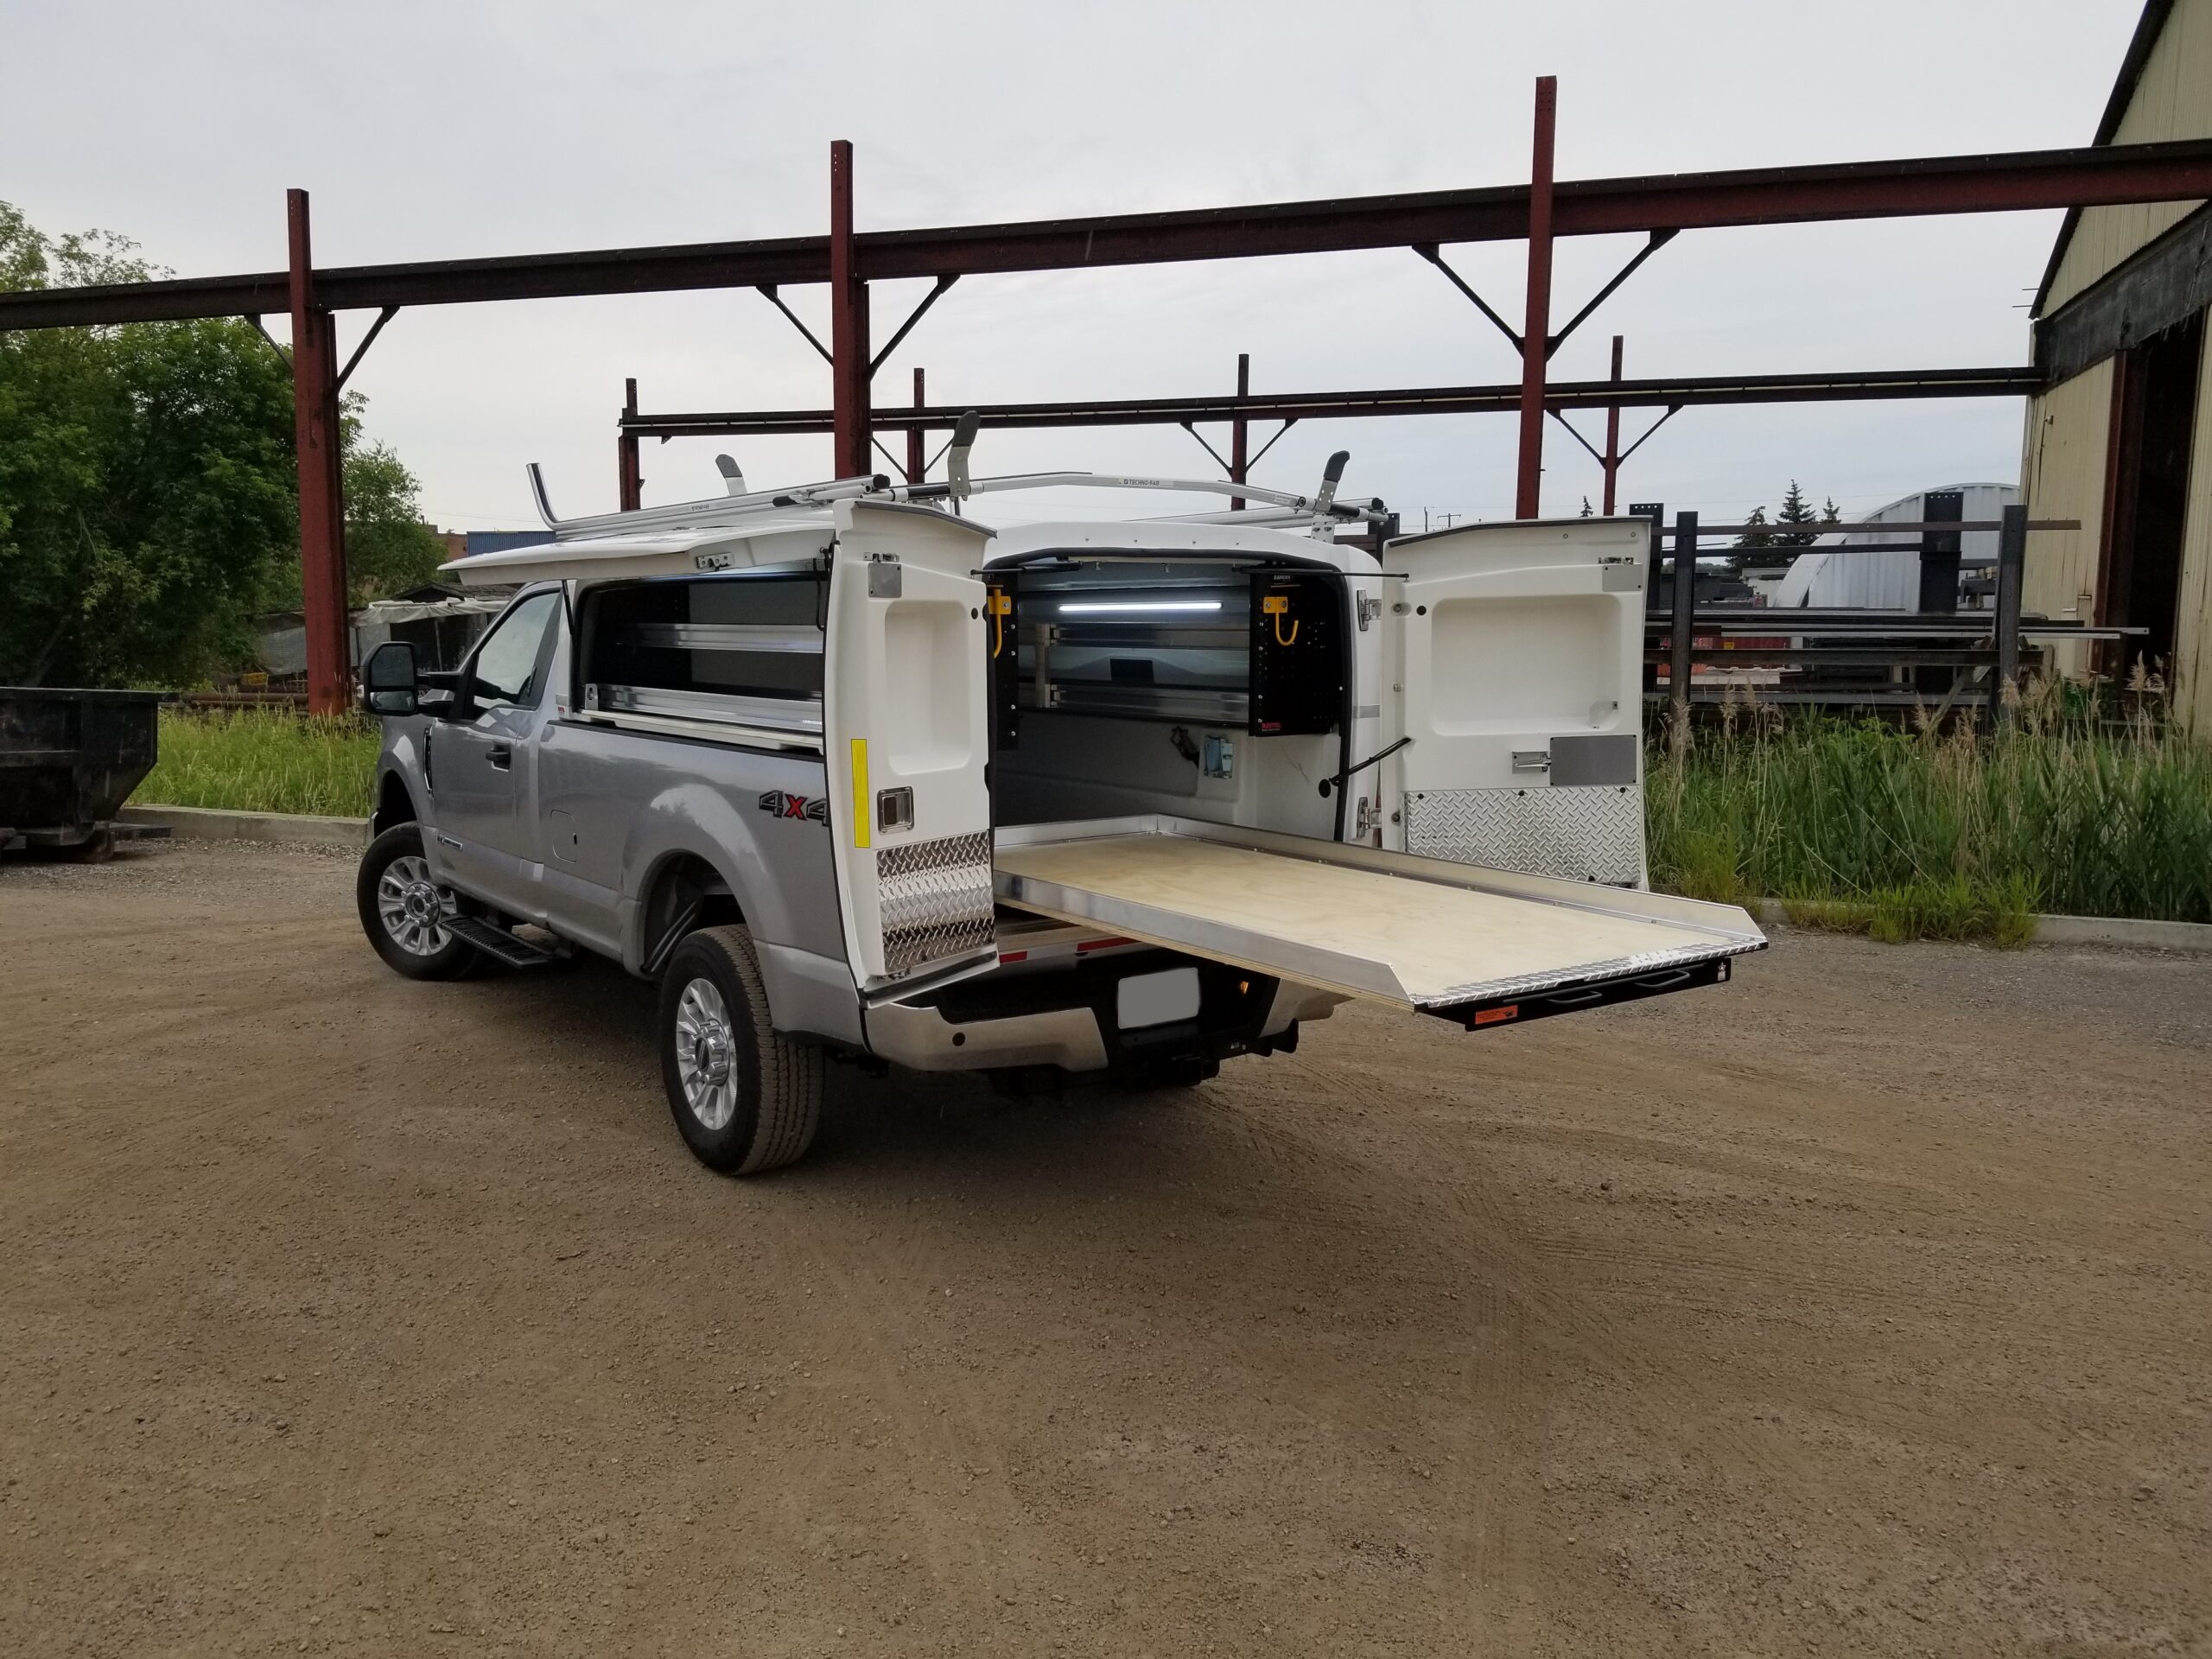 https://www.fleetoutfitters.com/wp-content/uploads/2023/04/Ford-F-250-Fibreglass-Slip-In-Cab-Height-with-Shelves-Roll-Out-Tray-scaled.jpg